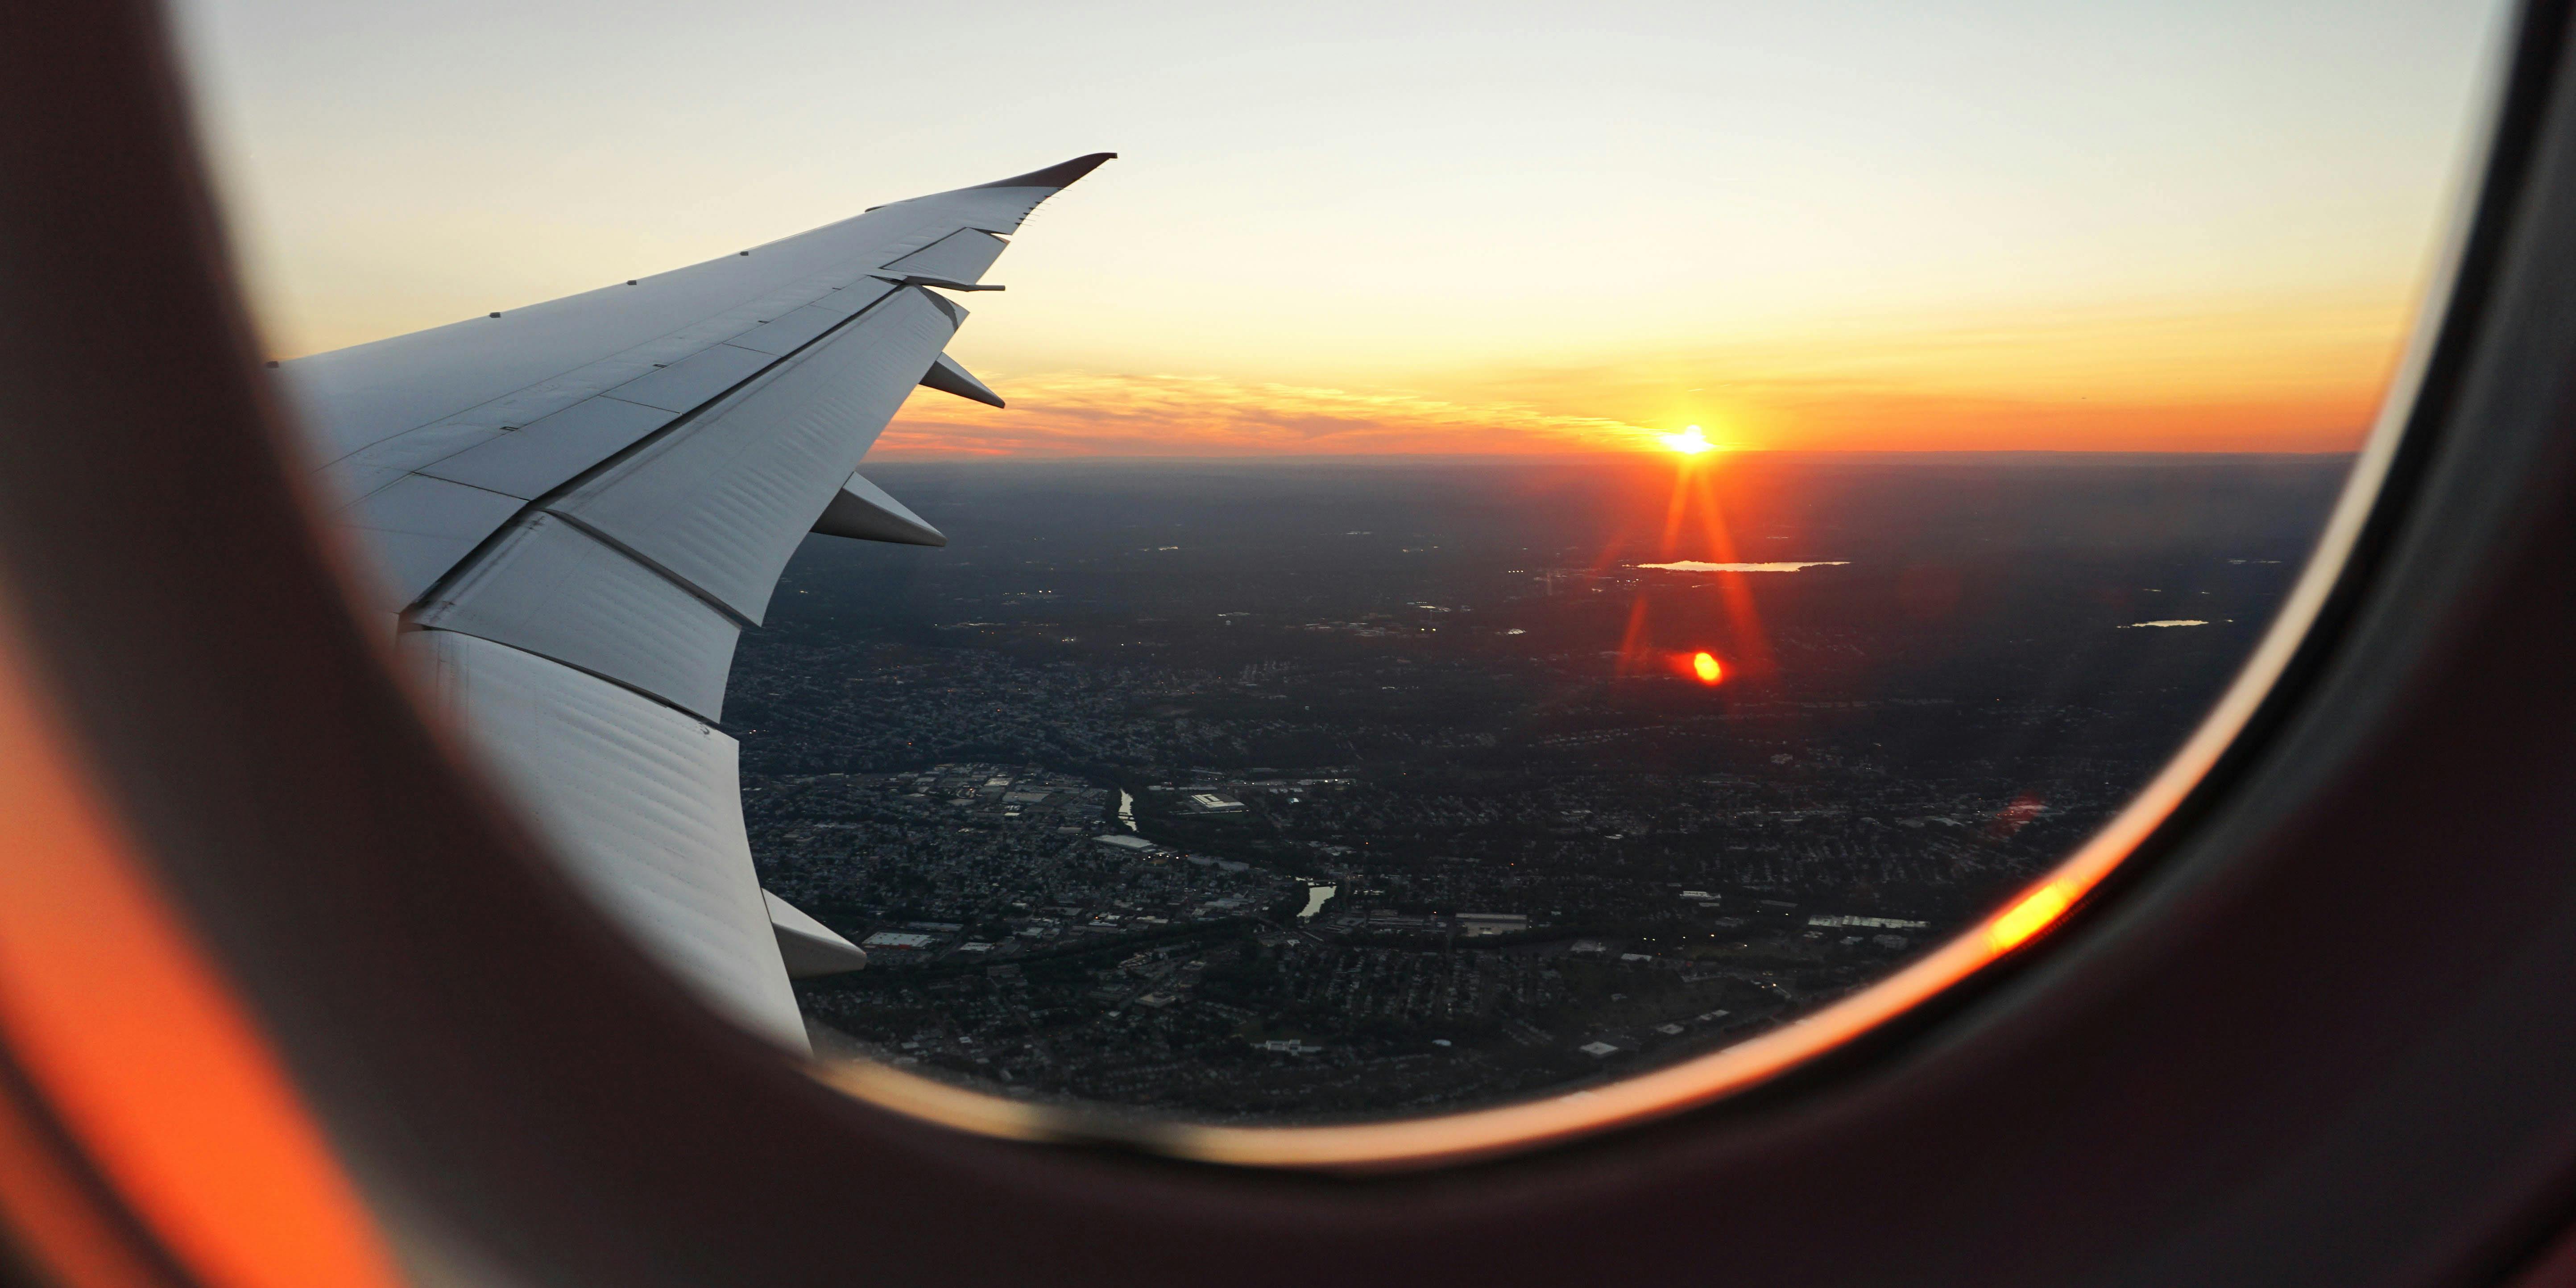 View from the window of an airplane. As of October 17, travellers can bring cannabis on domestic flights in Canada.